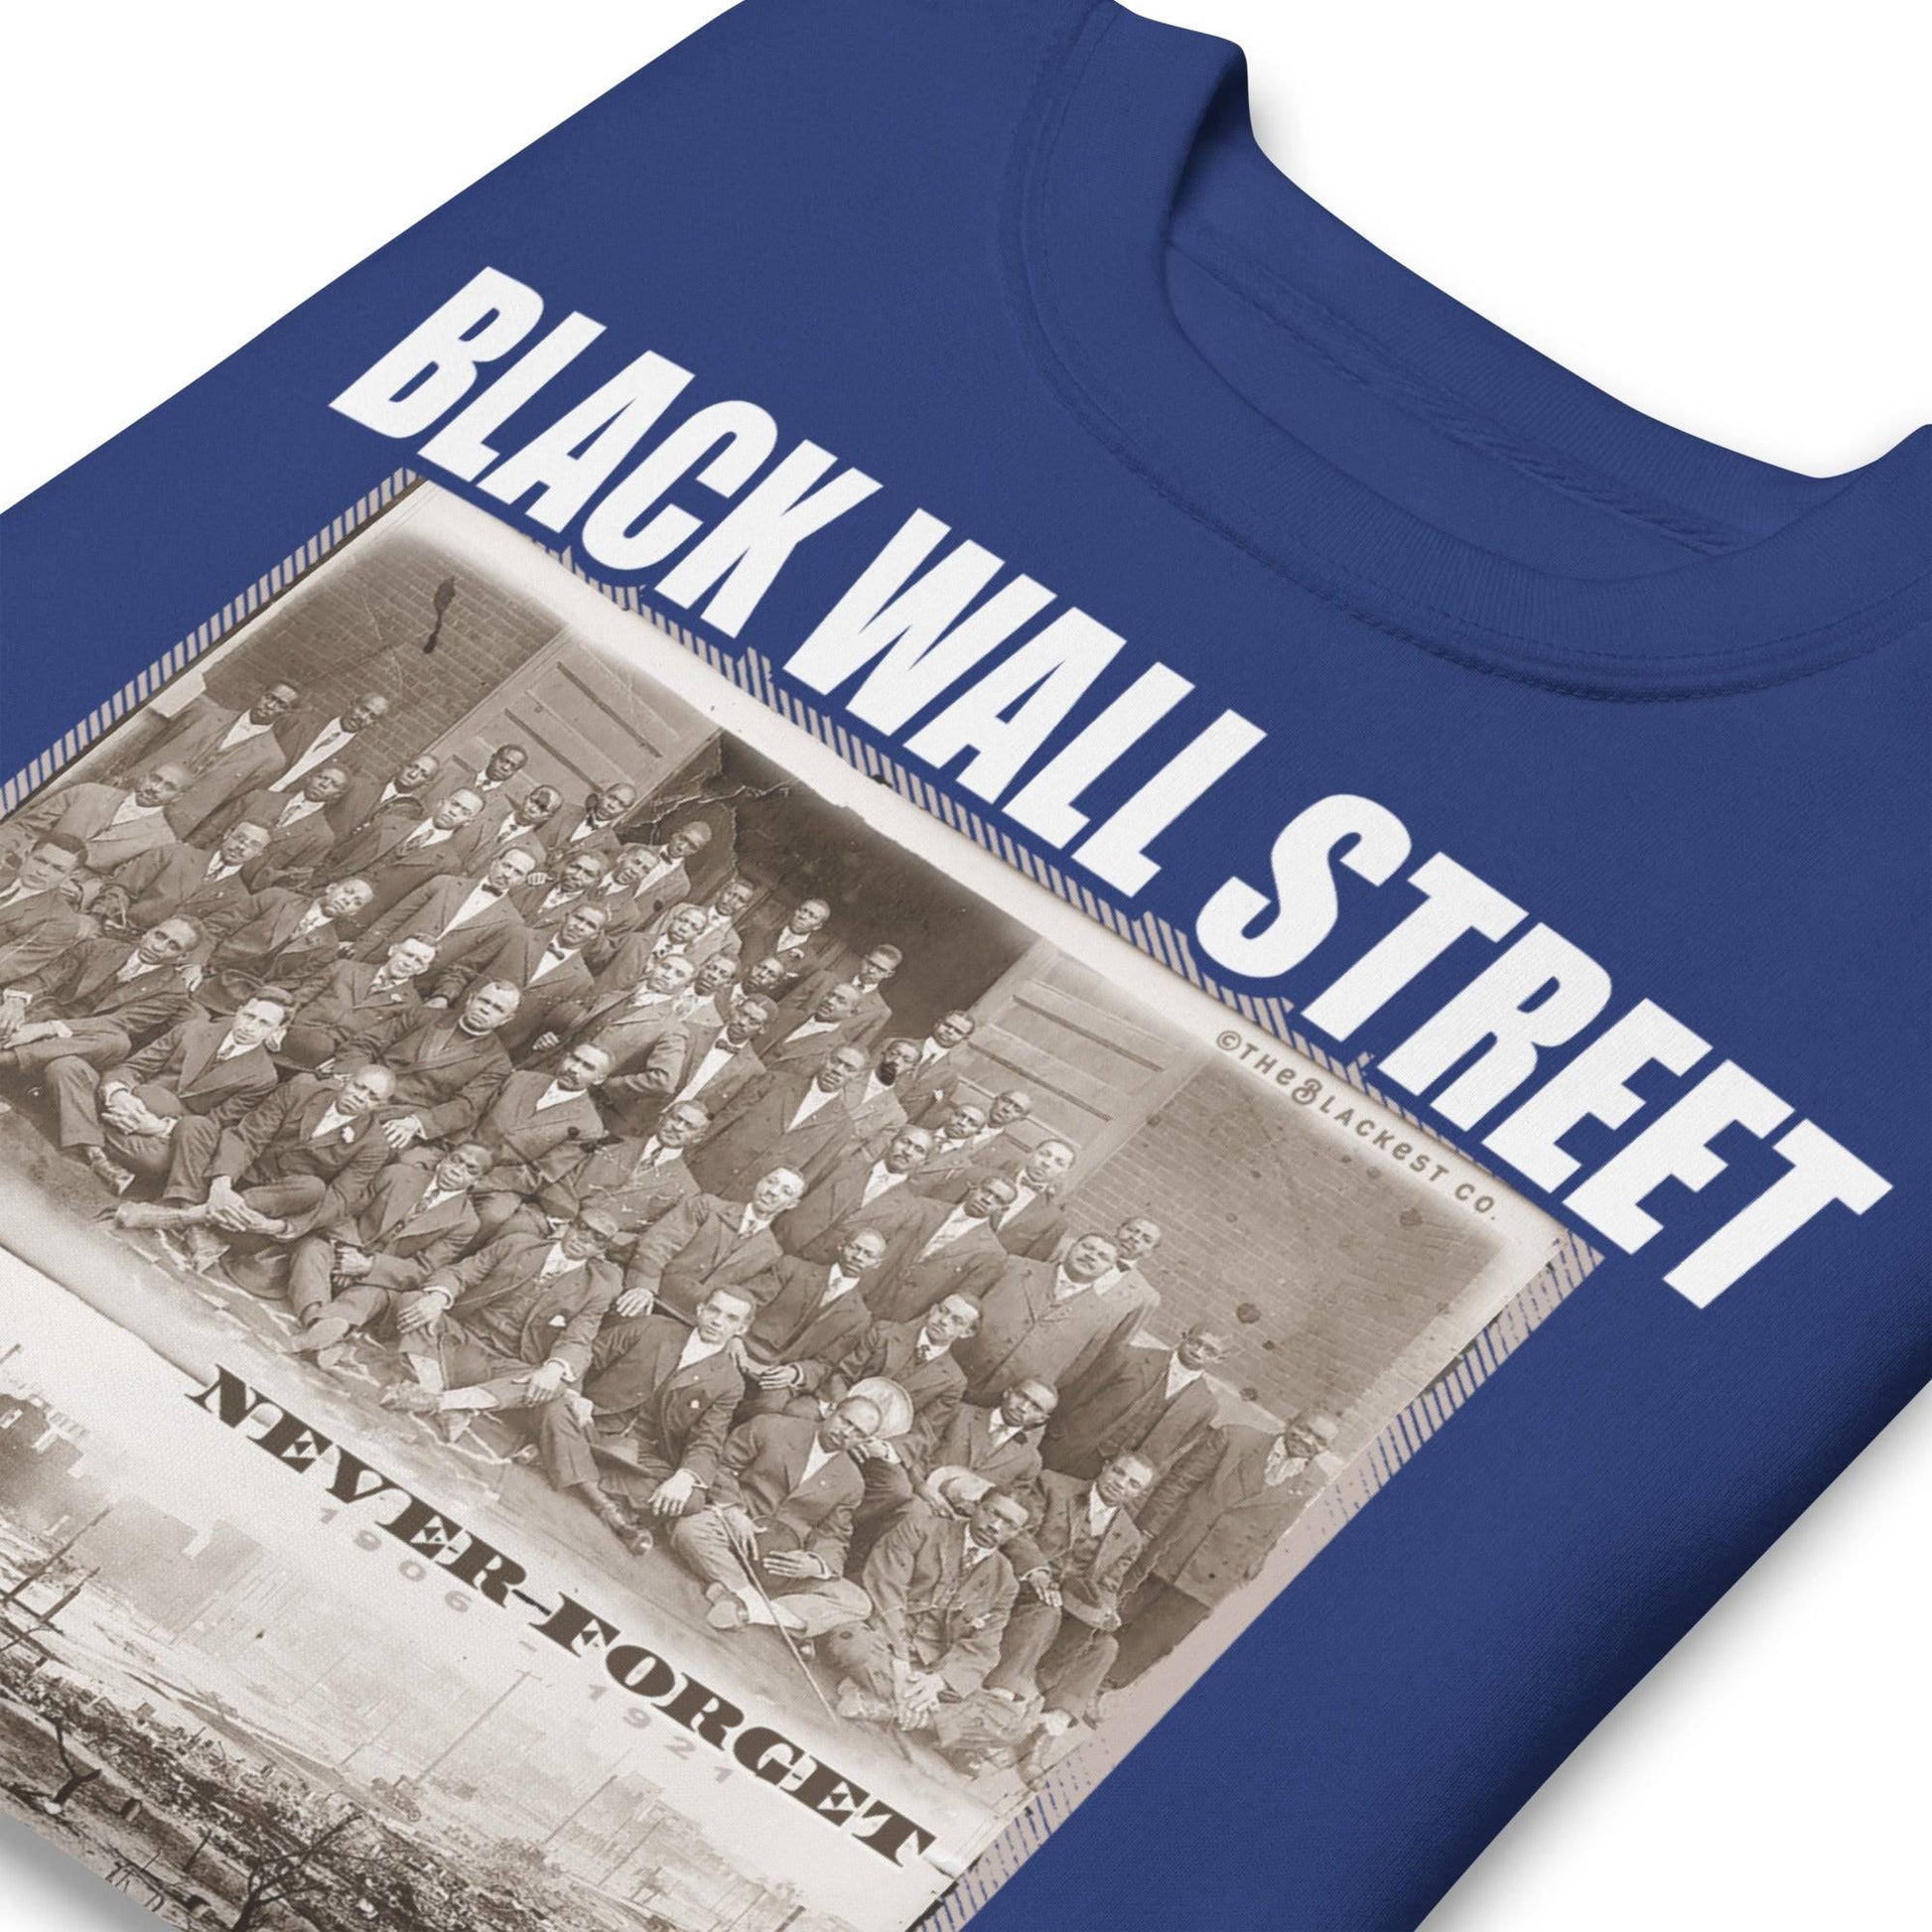 folded royal navy premium sweatshirt with writing that says Black Wall Street and Greenwood